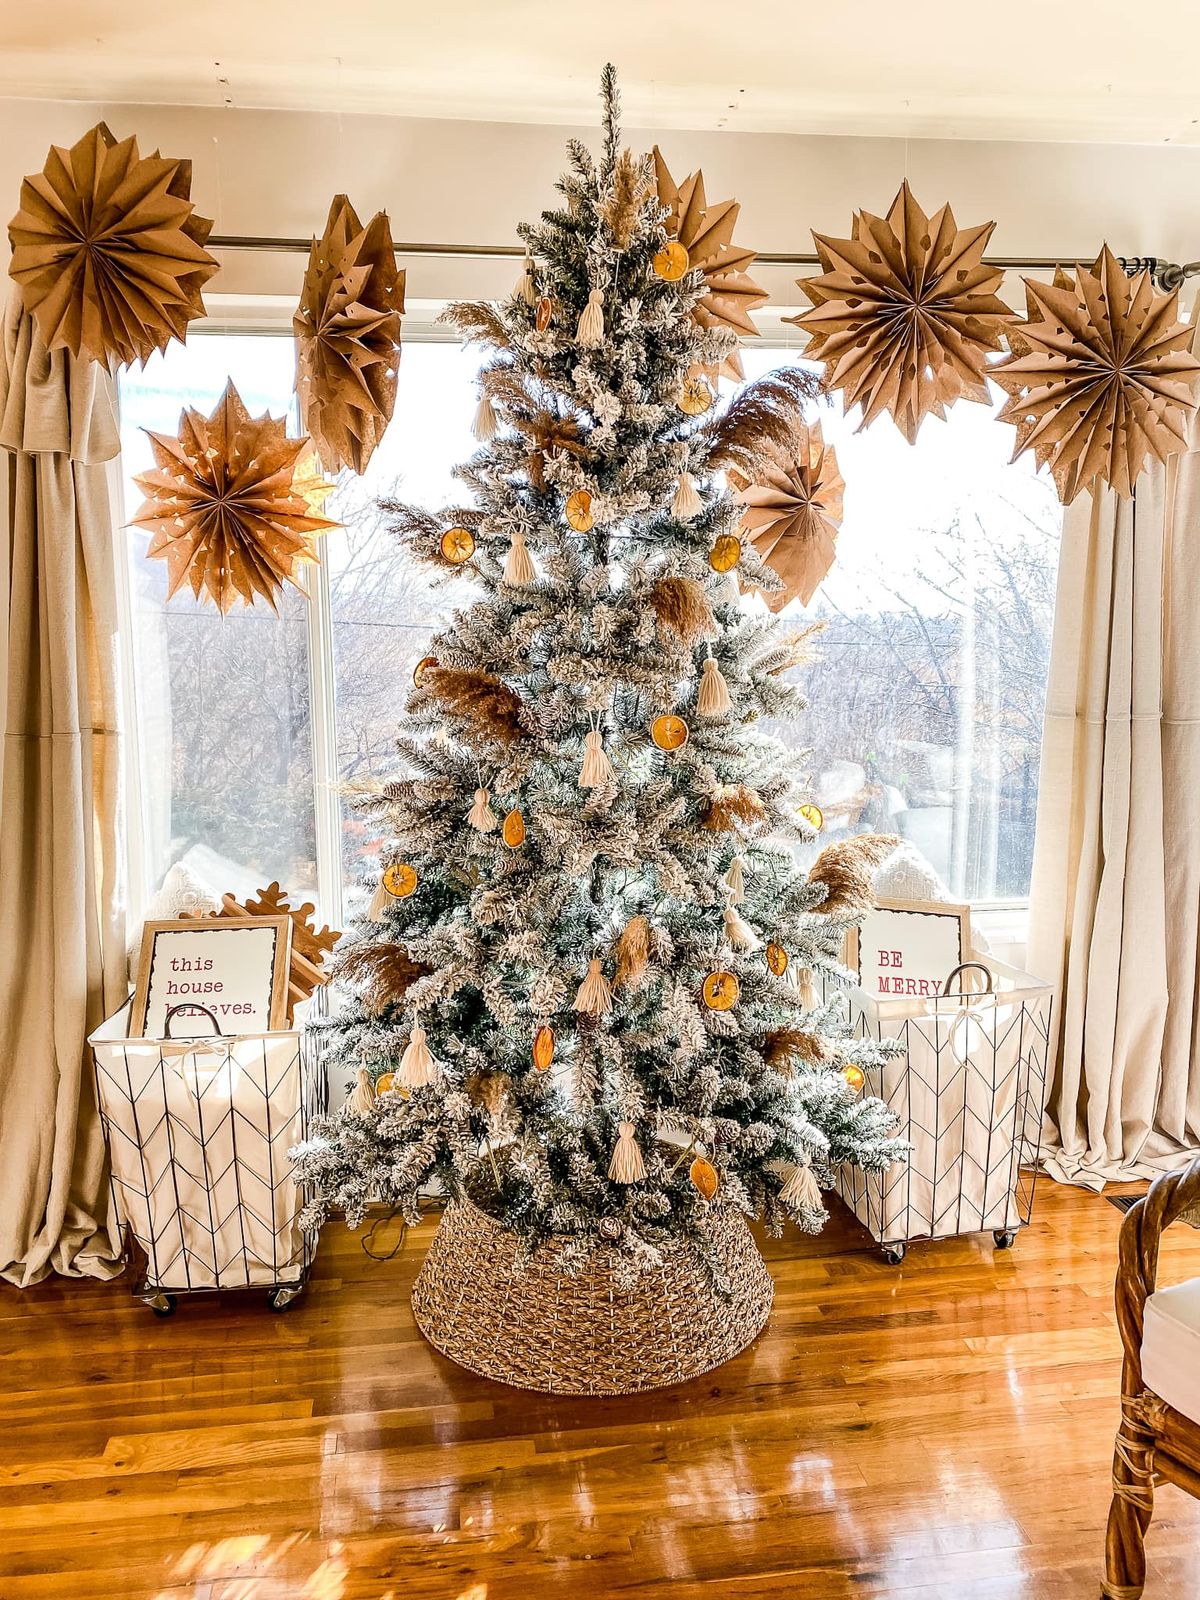 5 farmhouse Christmas tree ideas to steal from our favorite rustic homes